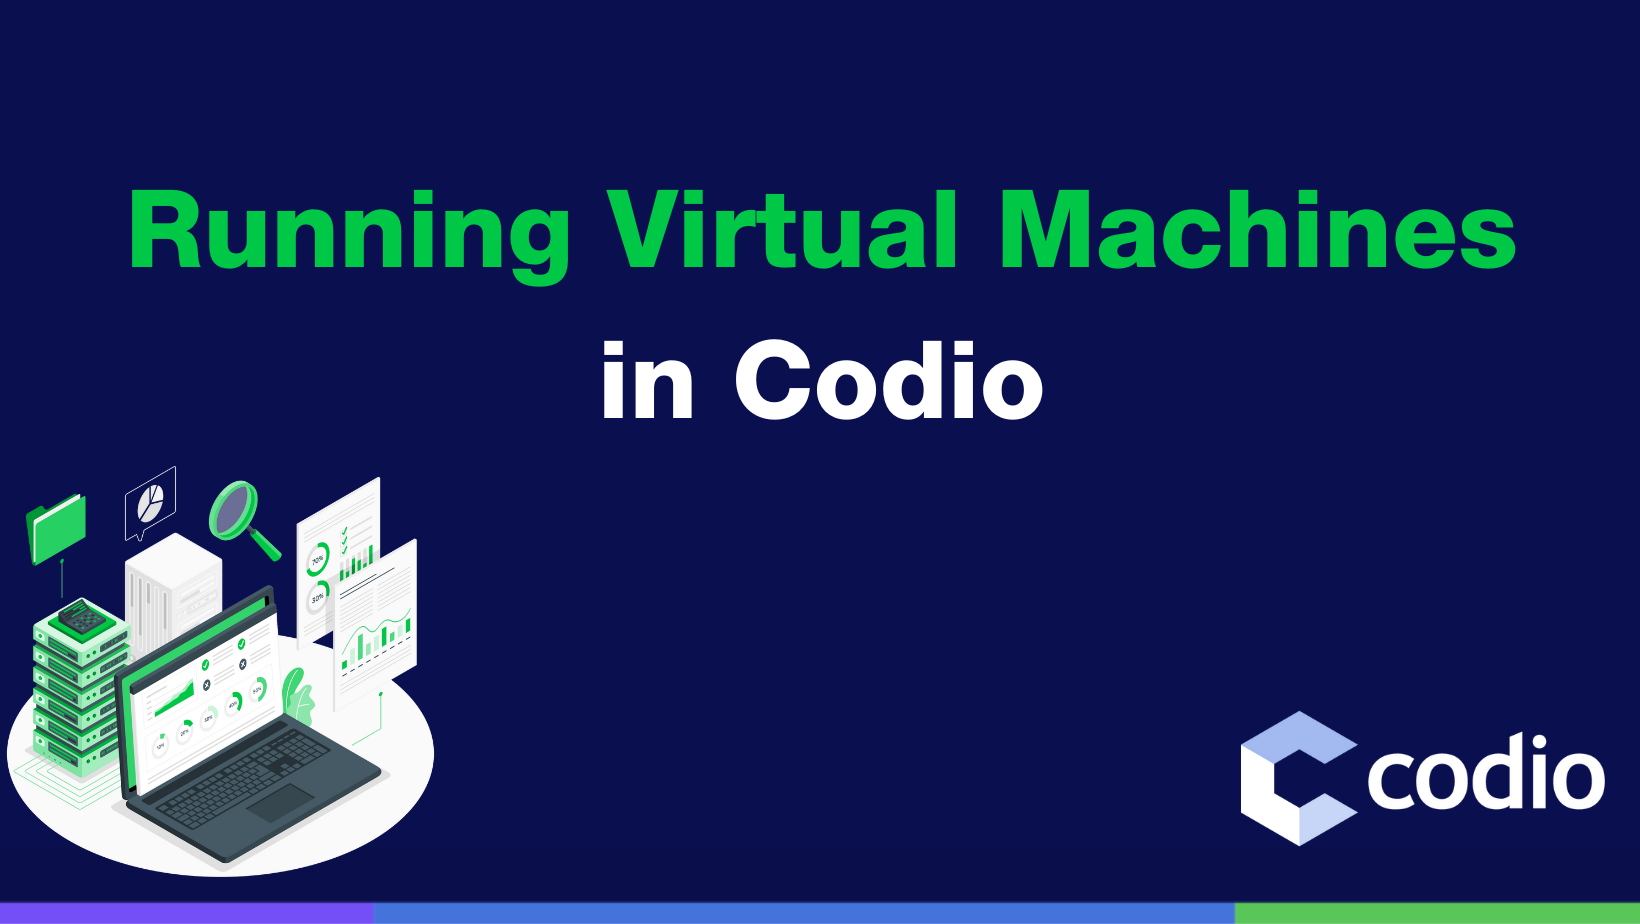 Running Windows VM and Other Virtual Machines in Codio